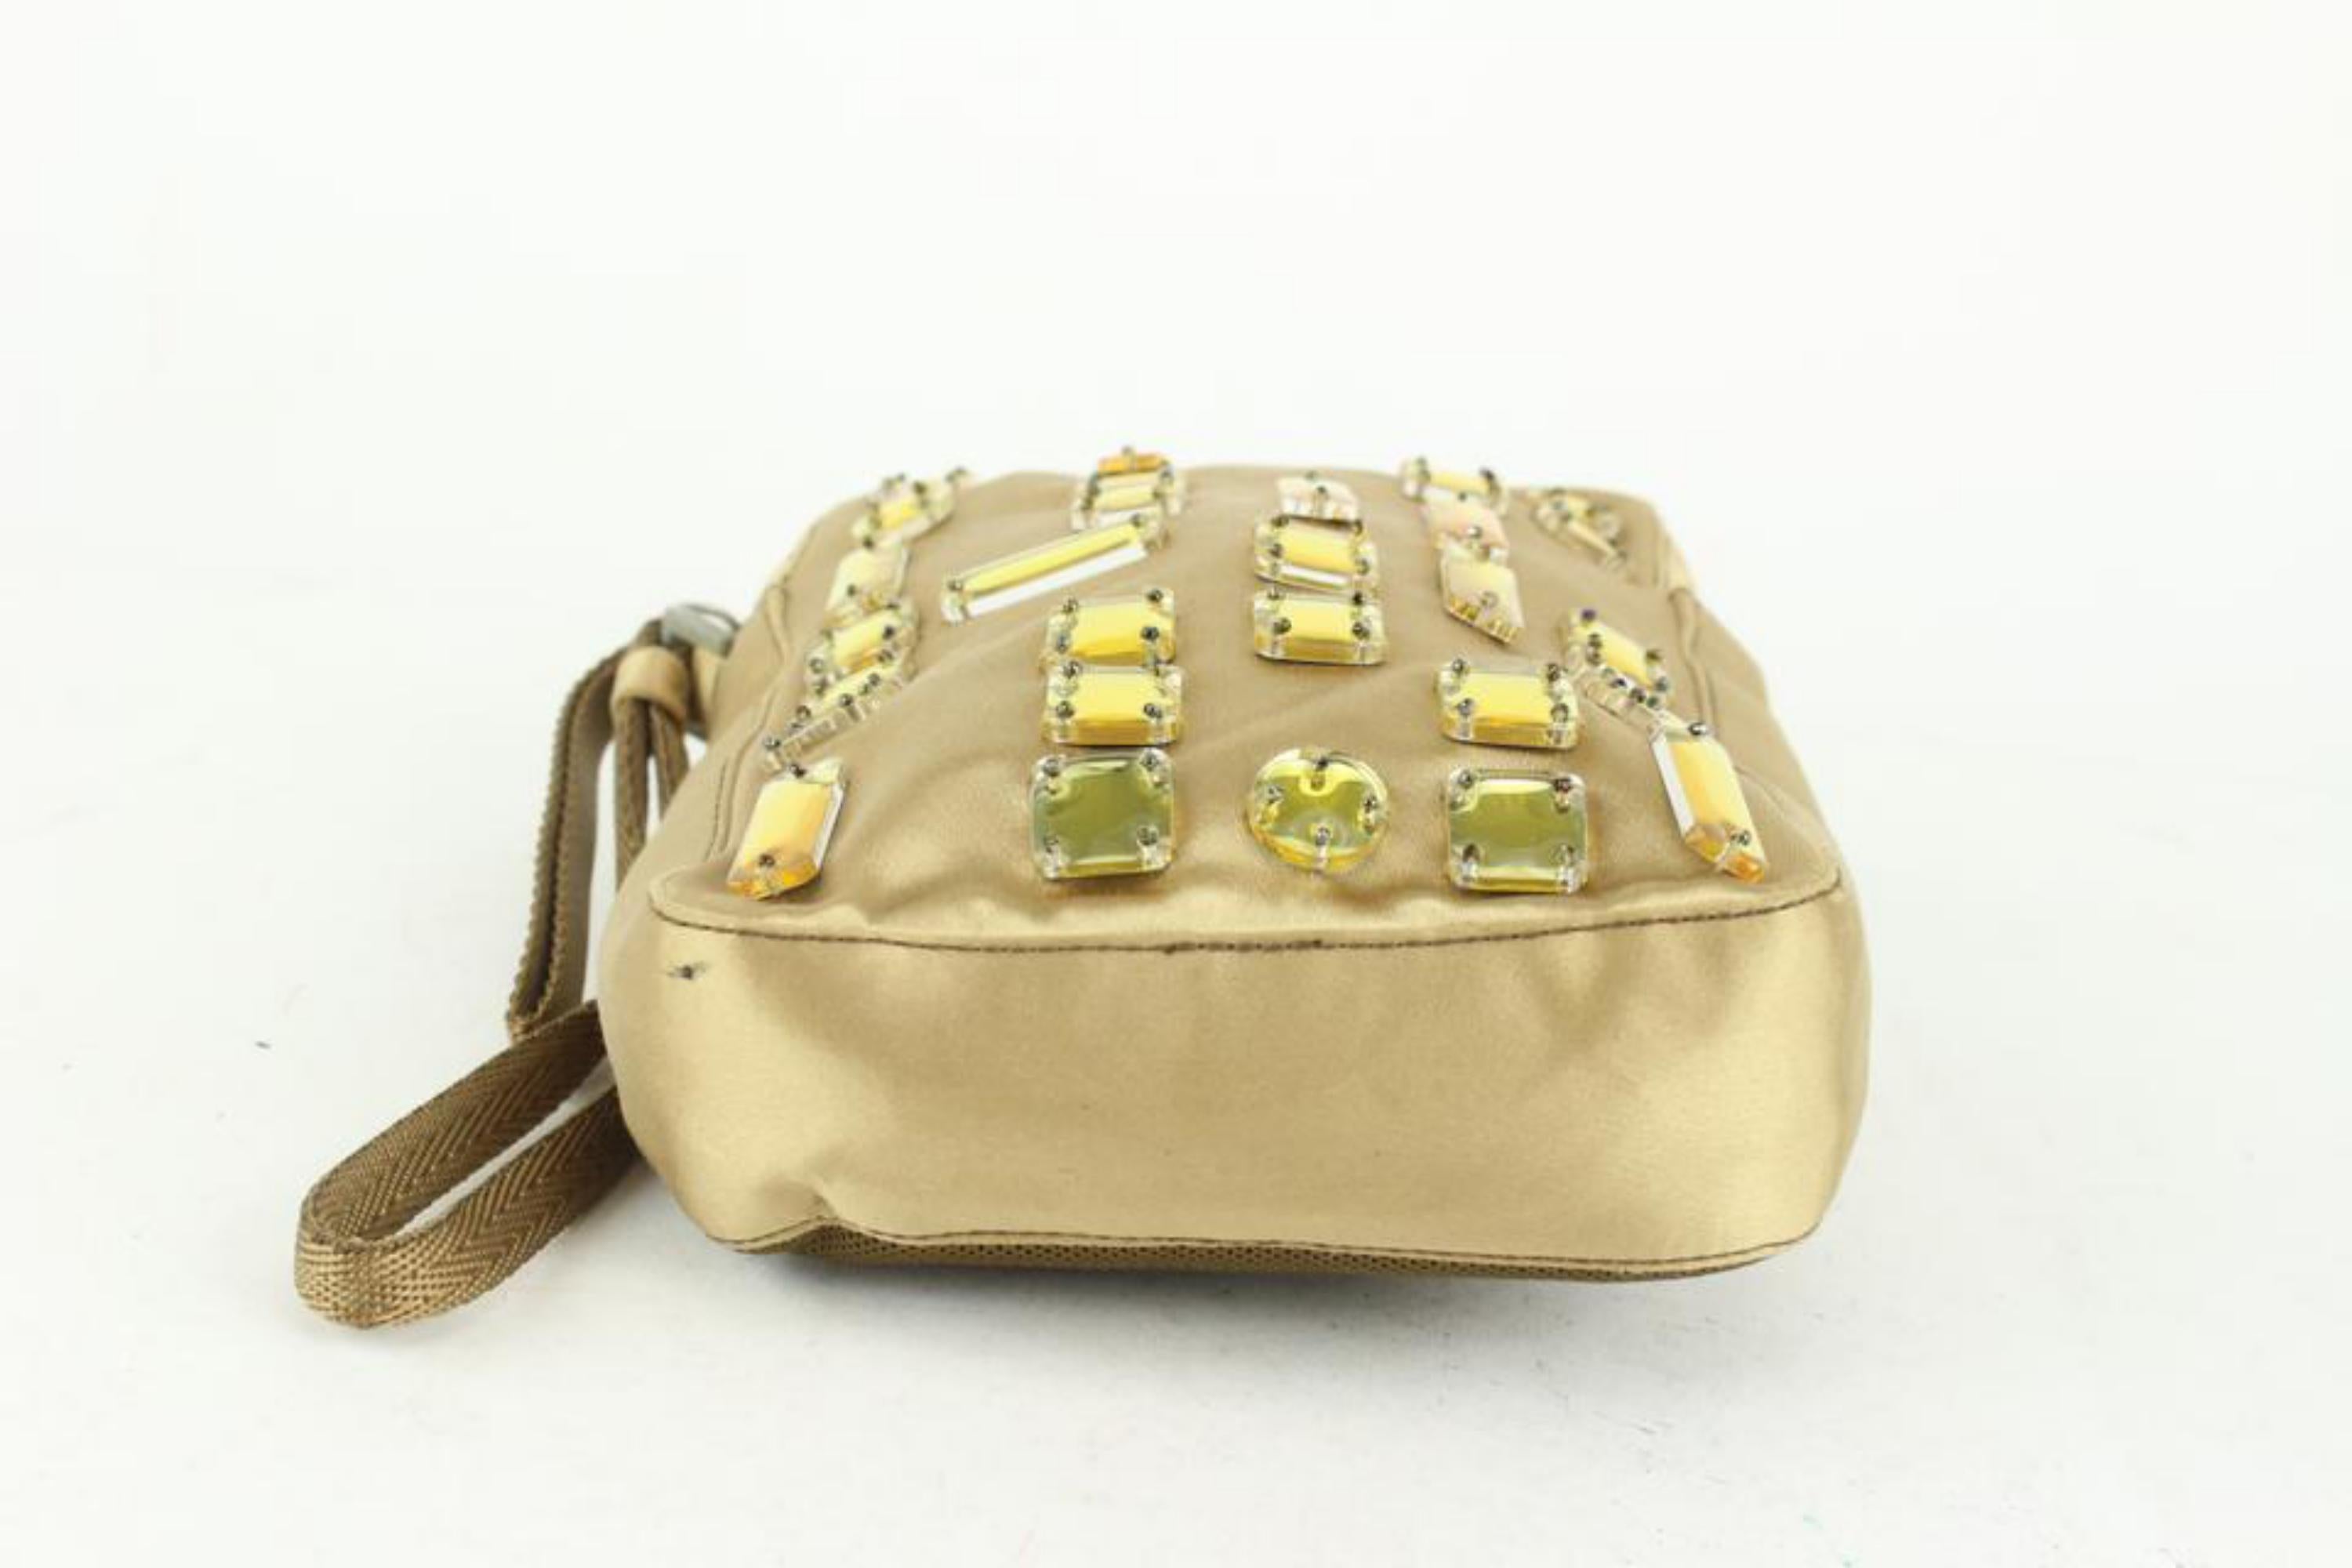 Prada Gold Satin Bejeweled Pochette Camera Case Cosmetic Pouch 1028p9 In Good Condition For Sale In Dix hills, NY